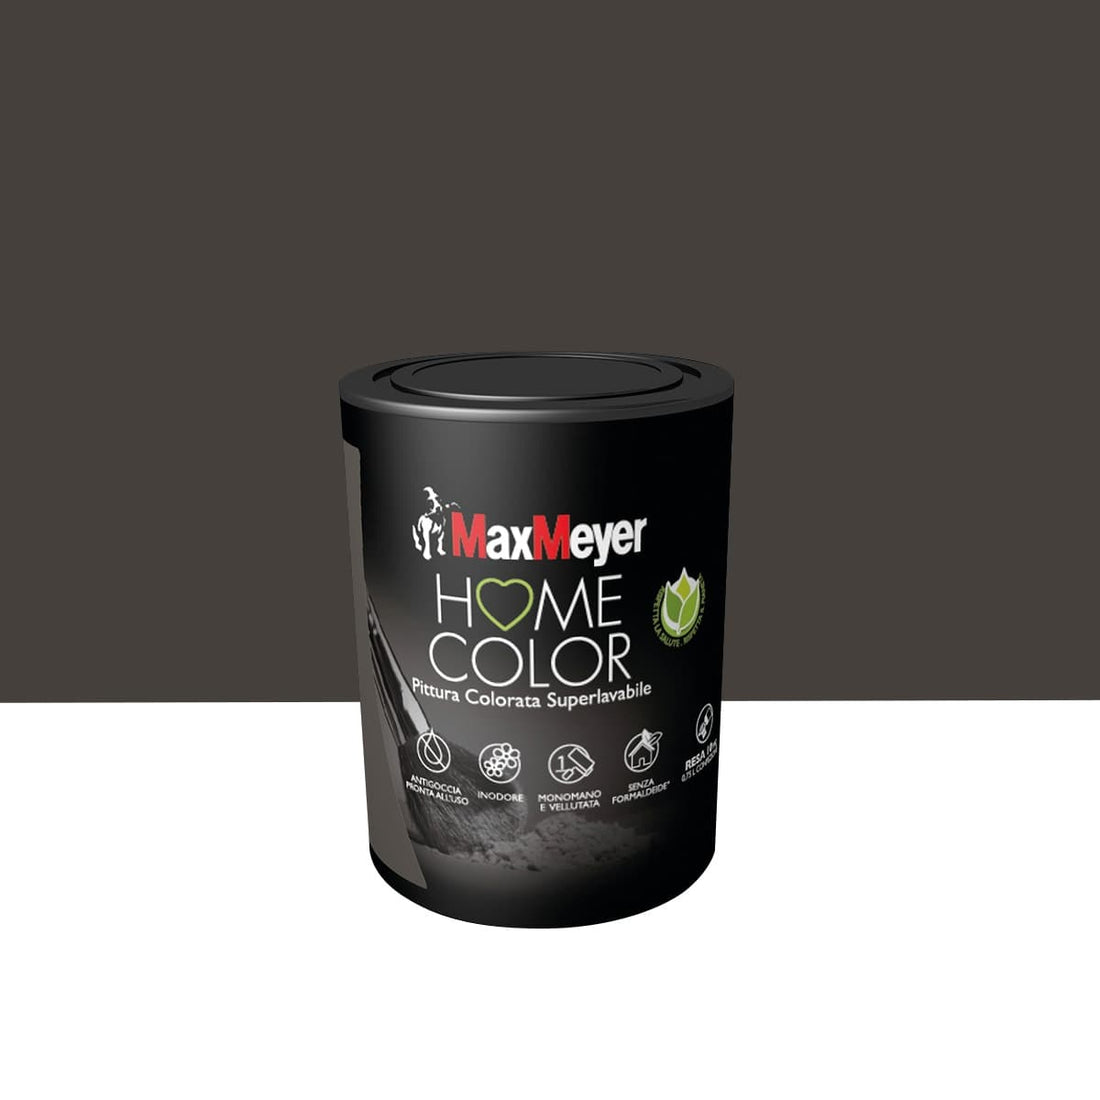 COFFEE BROWN SUPERWASHABLE PAINT HOME COLOUR 750 ML - best price from Maltashopper.com BR470003897